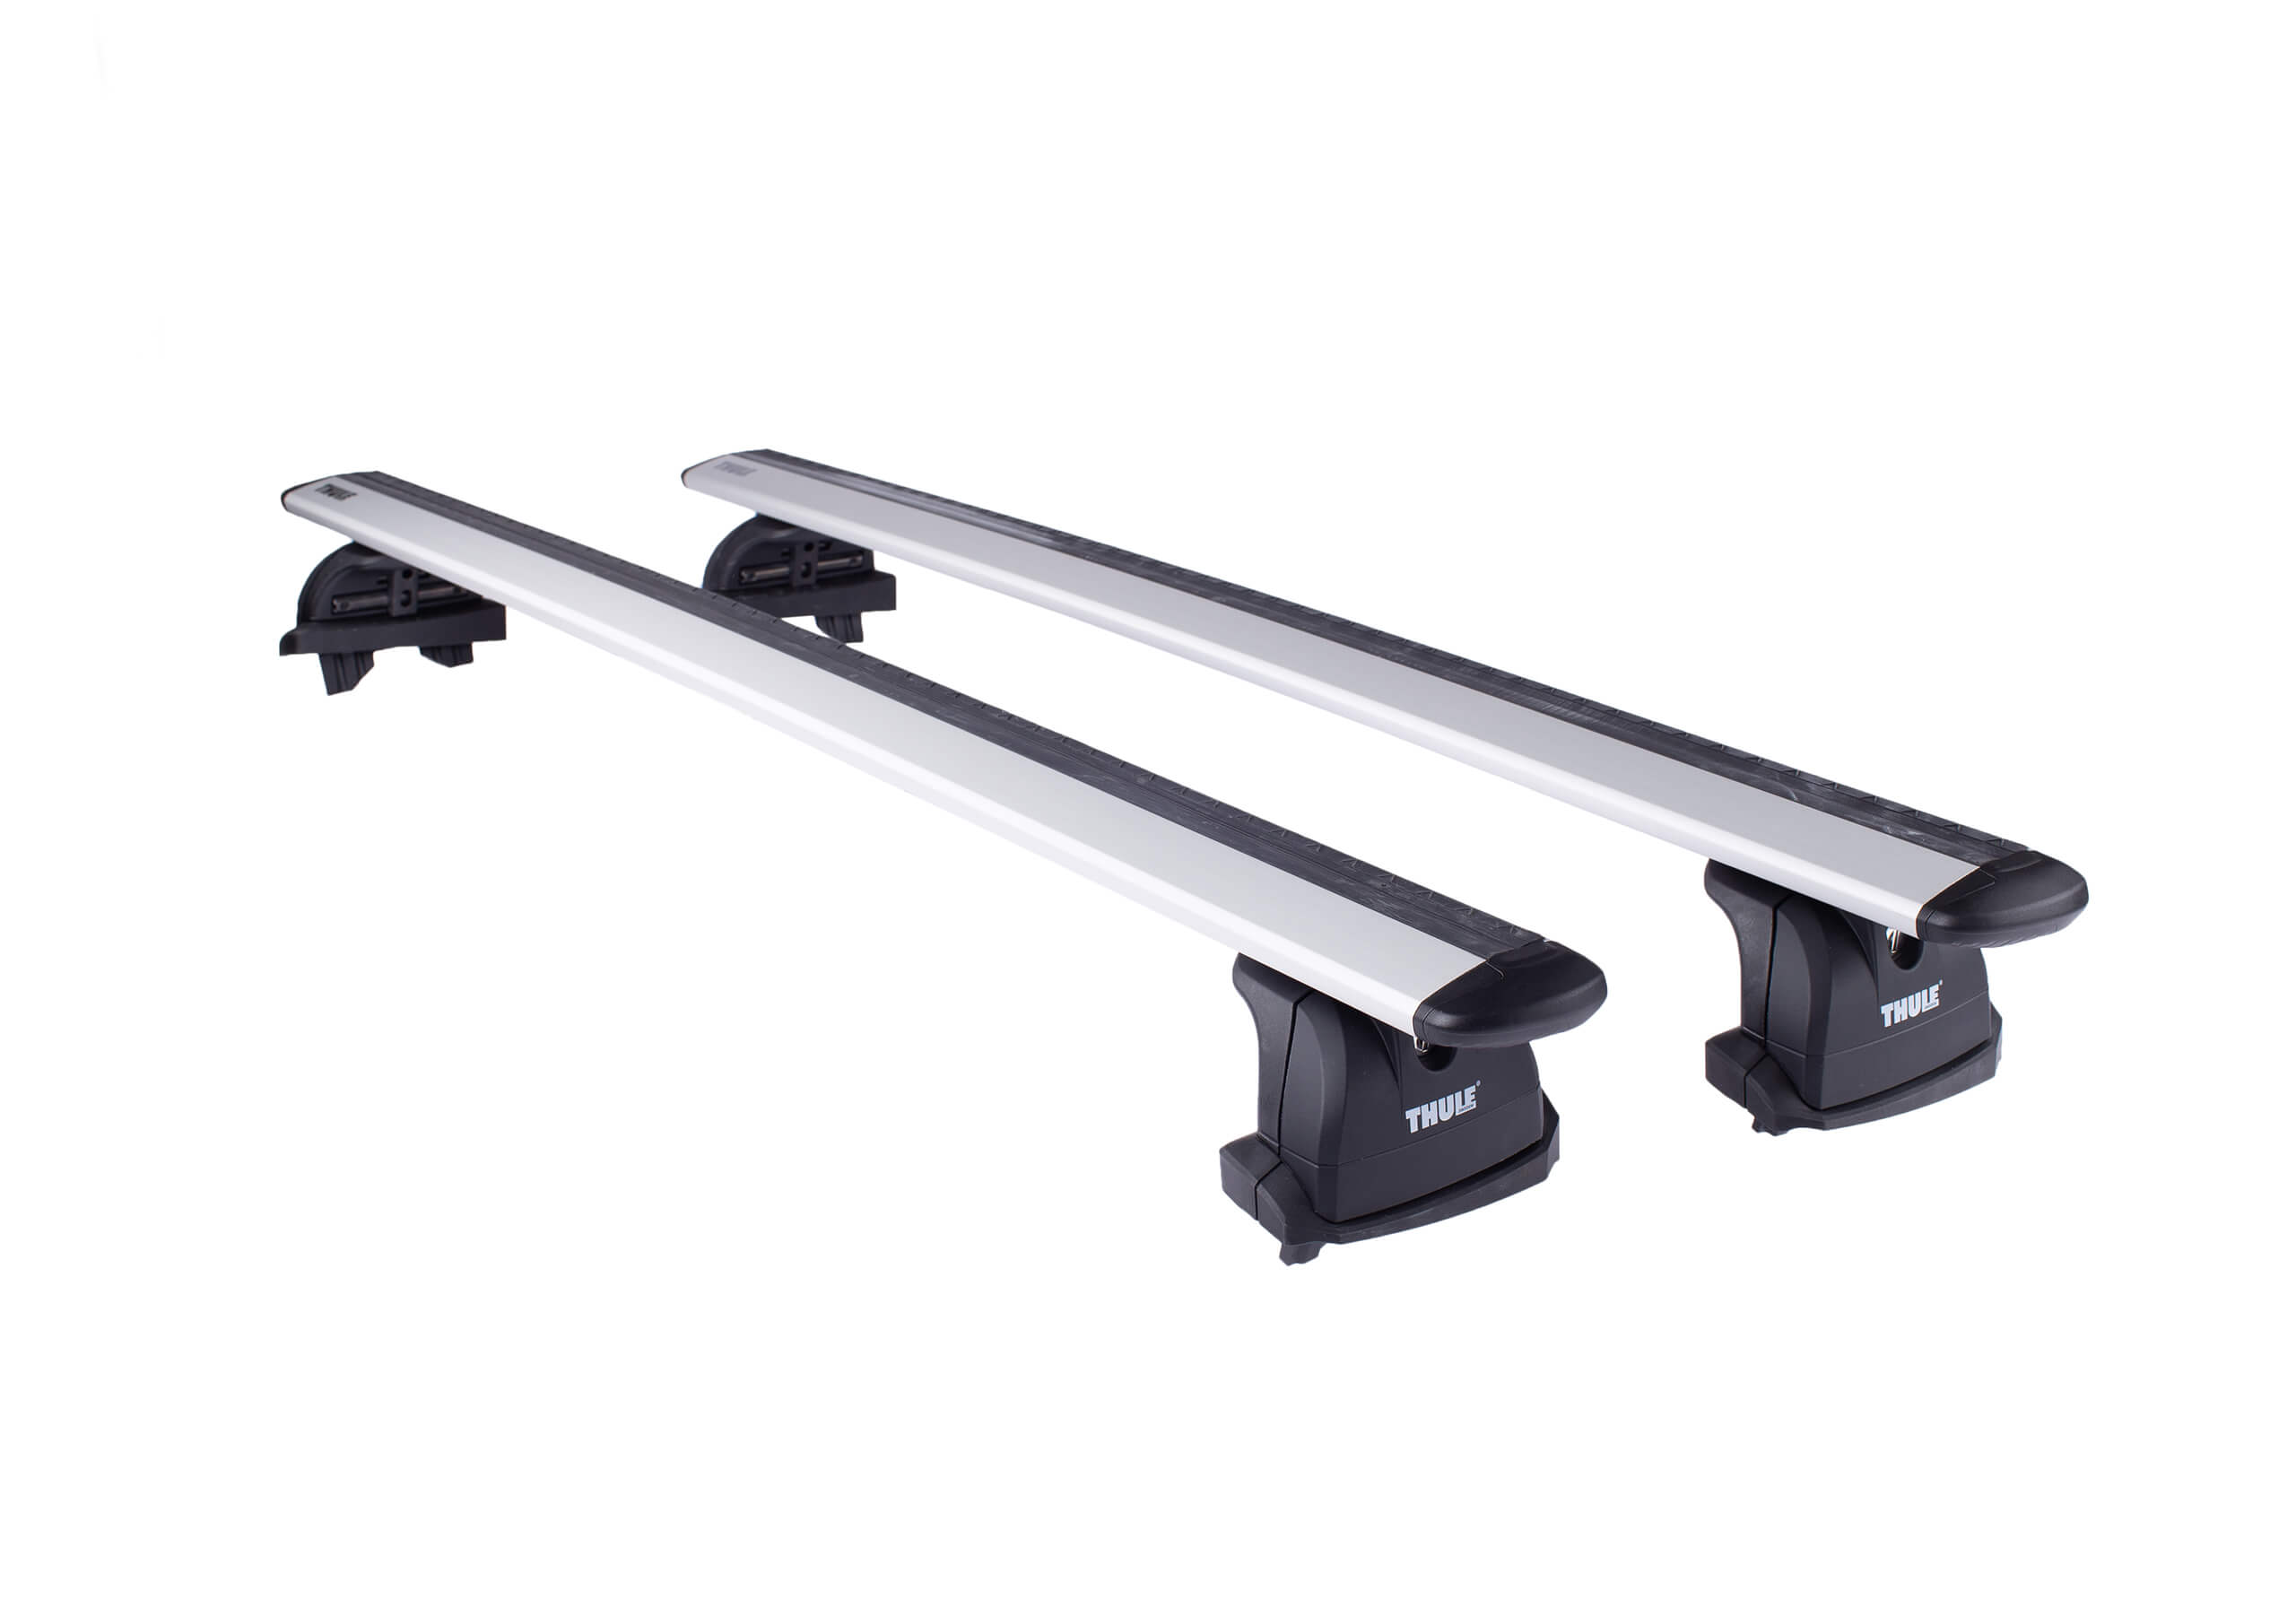 Volkswagen VW Caddy (1996 to 2002):Thule silver Evo WingBars package - 753, 7111, 3007